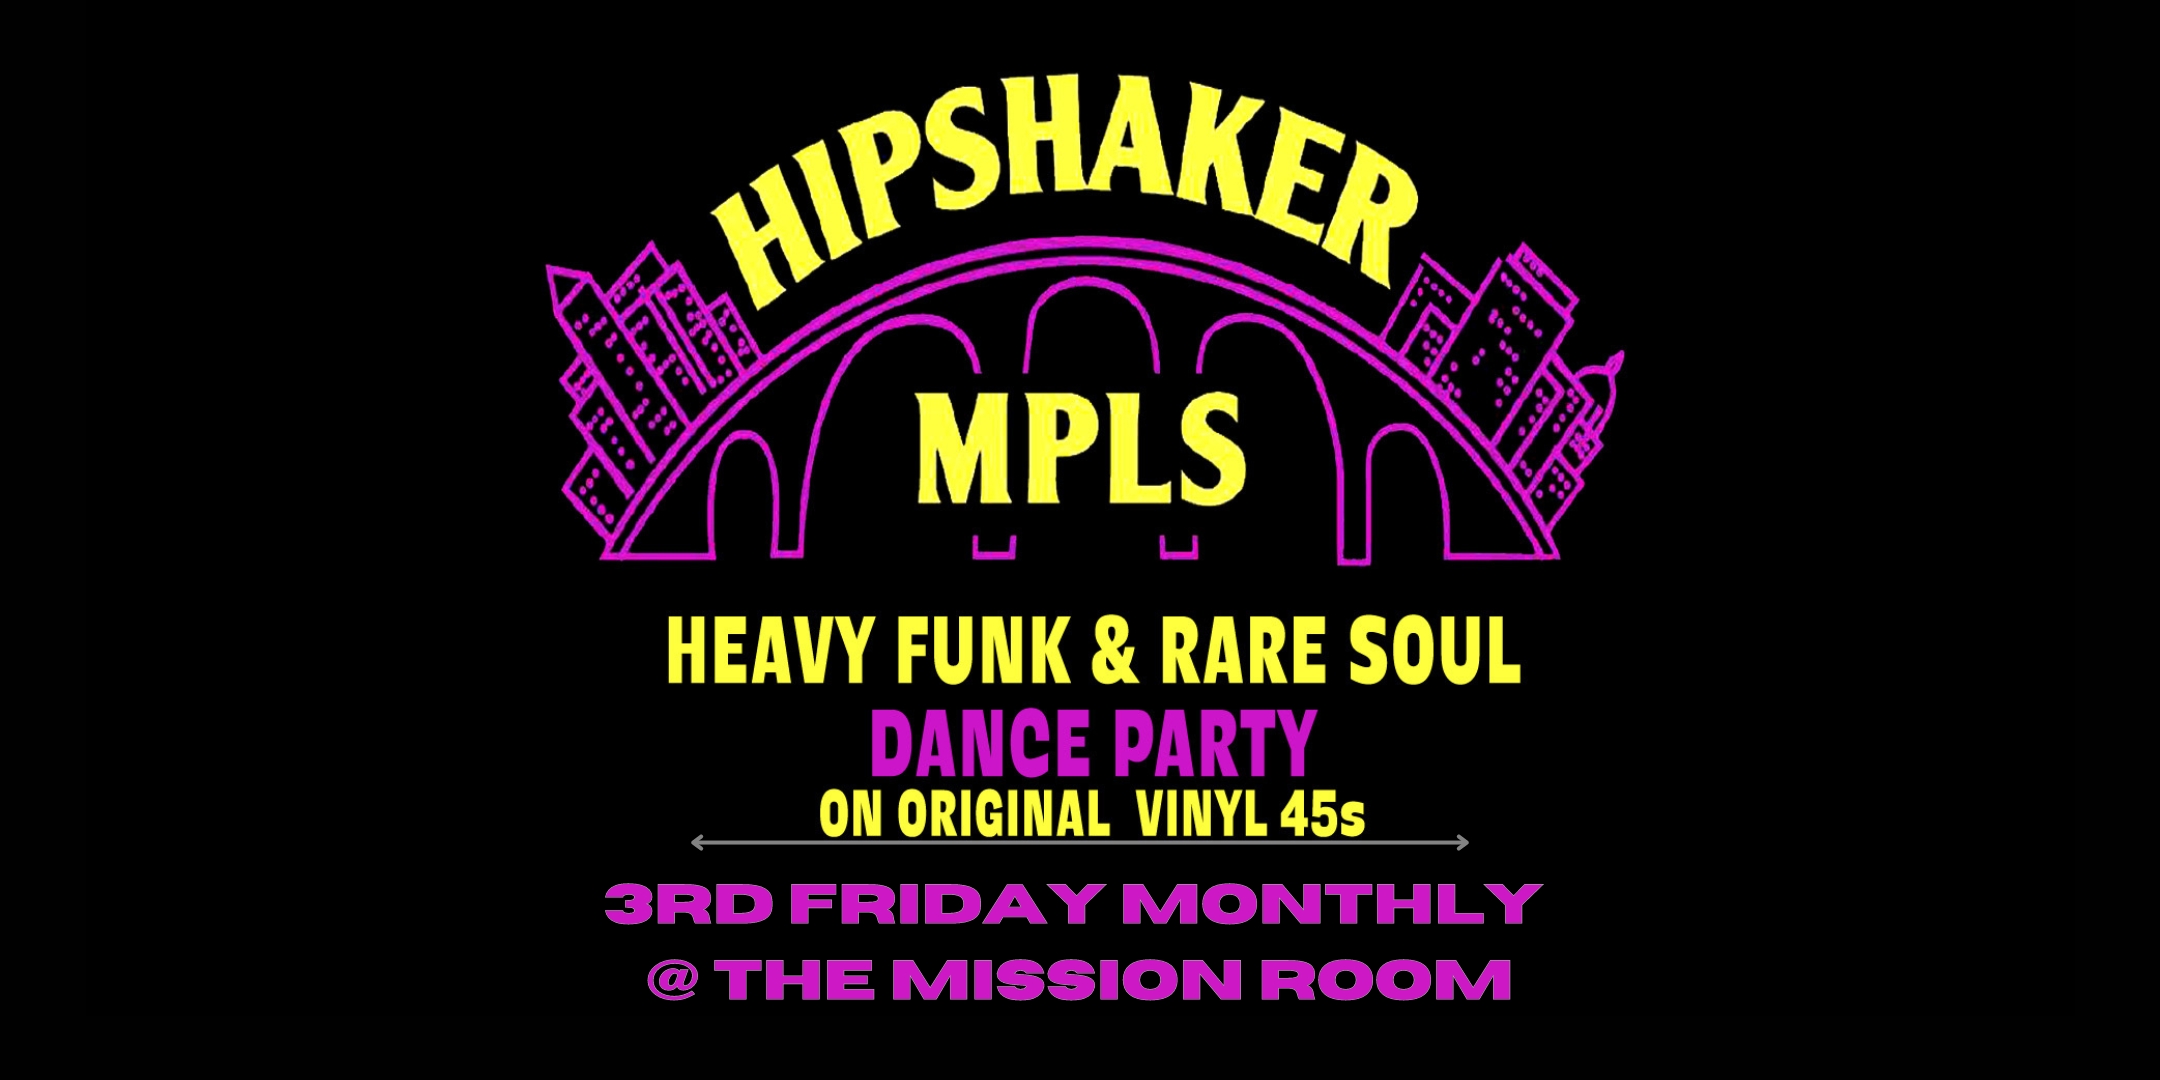 Hipshaker MPLS Heavy Funk & Rare Soul Dance Party Original Vinyl 45s! DJs Brian Engel, Greg Waletski, George Rodriguez Friday, December 20 The Mission Room at The Hook and Ladder Theater Doors 8:30pm :: Music 8:30pm :: 21+ GA $10 ADV / $15 DOS NO REFUNDS